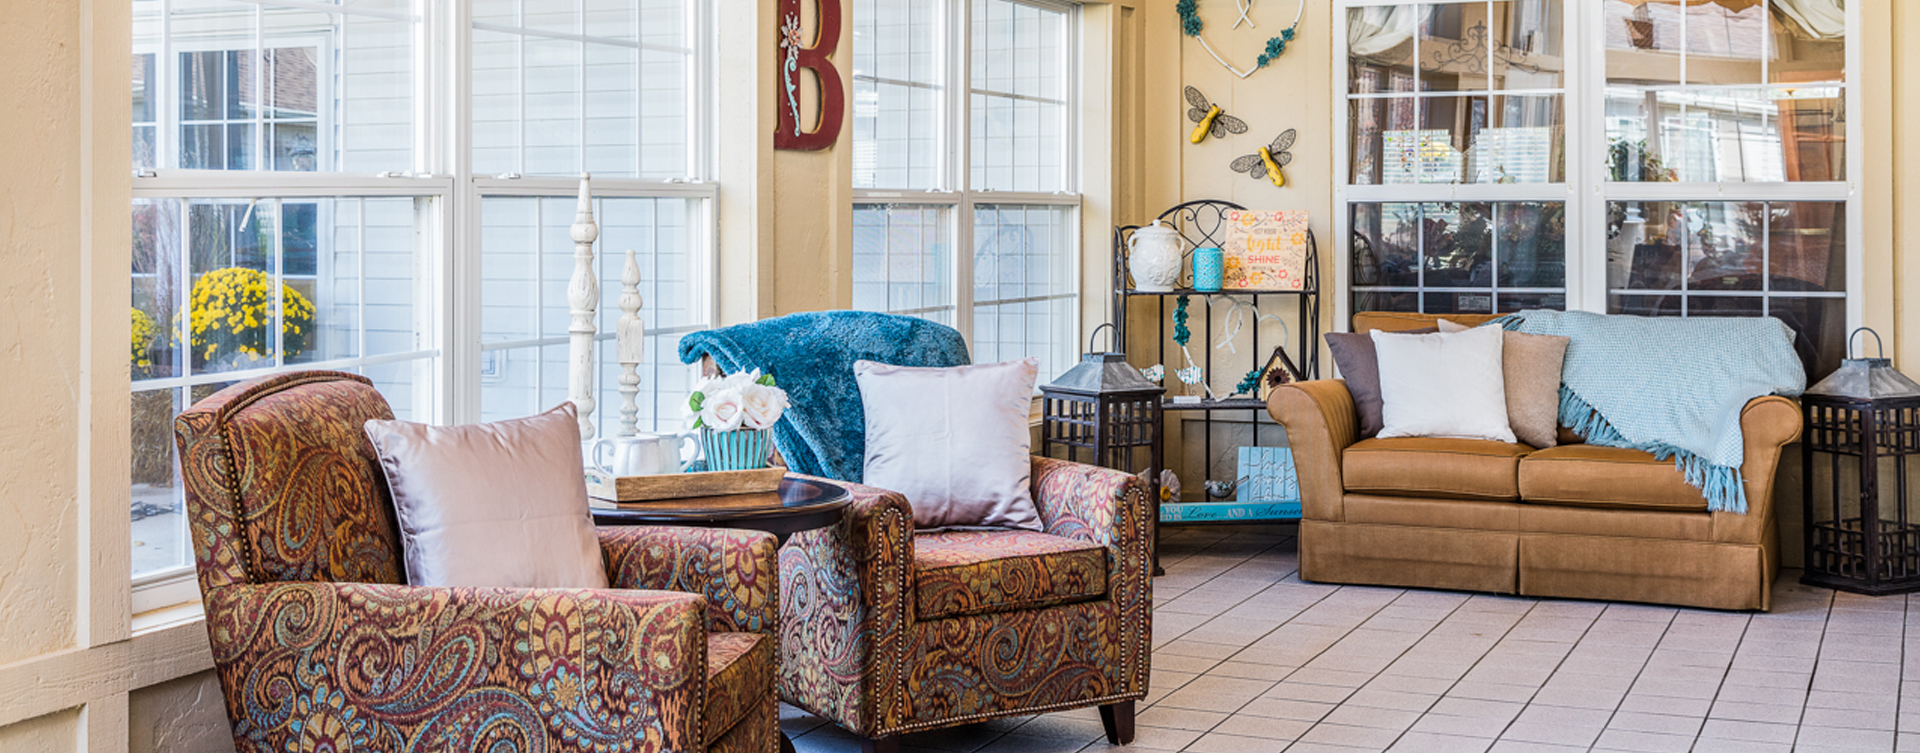 Relax in the warmth of the sunroom at Bickford of Fort Dodge